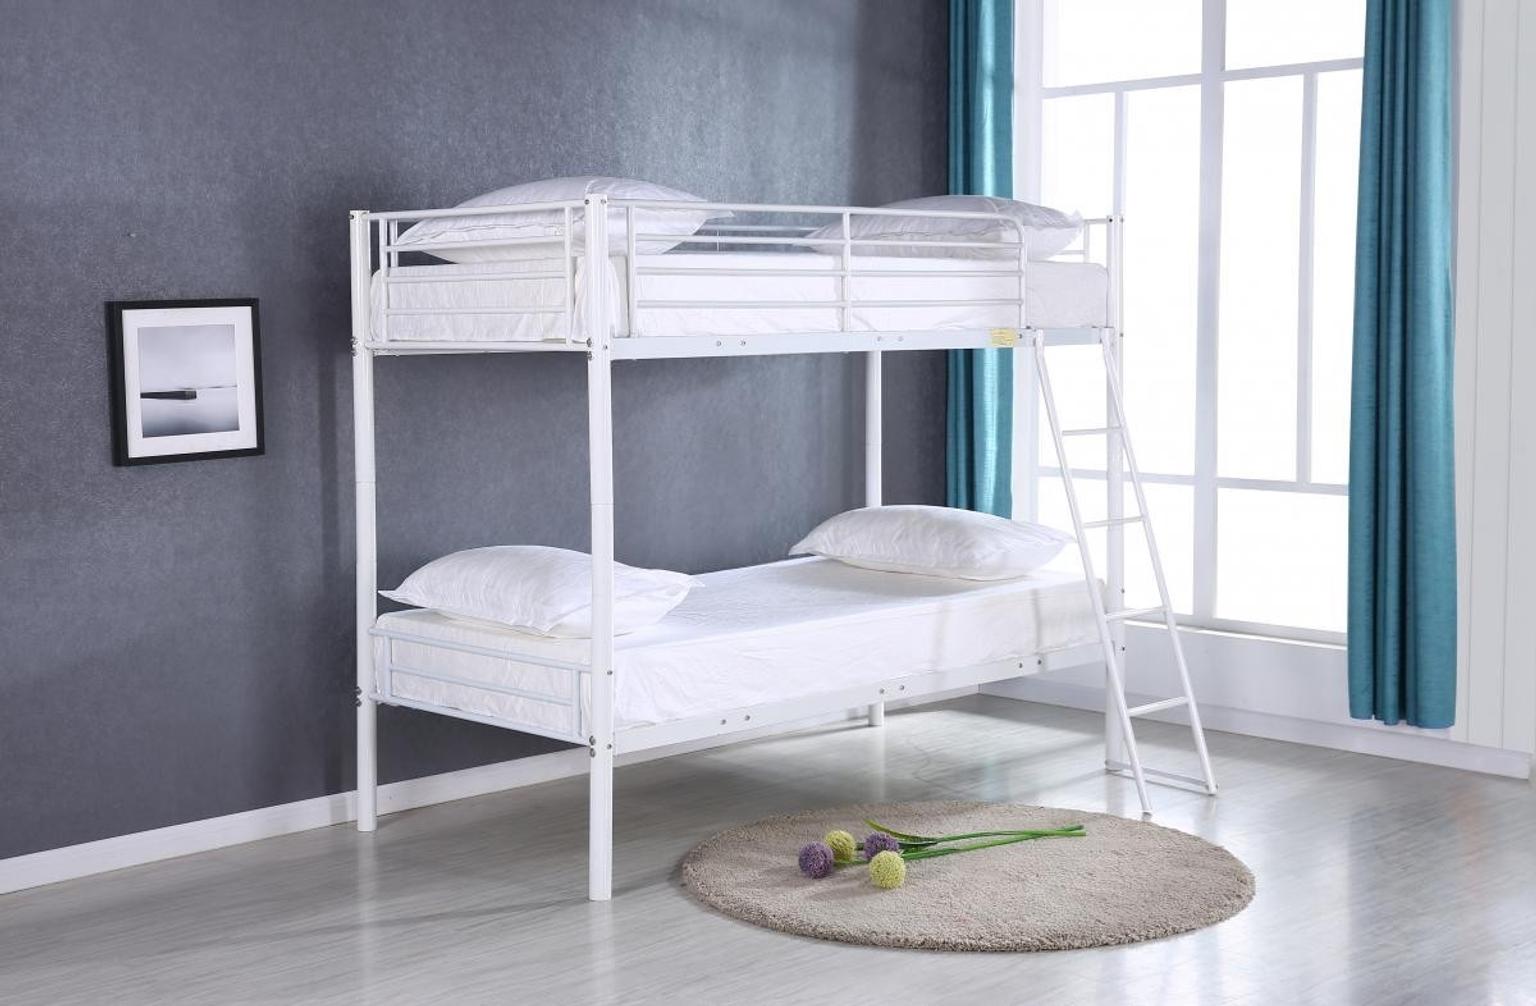 Modern Metal Sy Bunk Bed Frame Only, Bunk Beds Assembled On Delivery